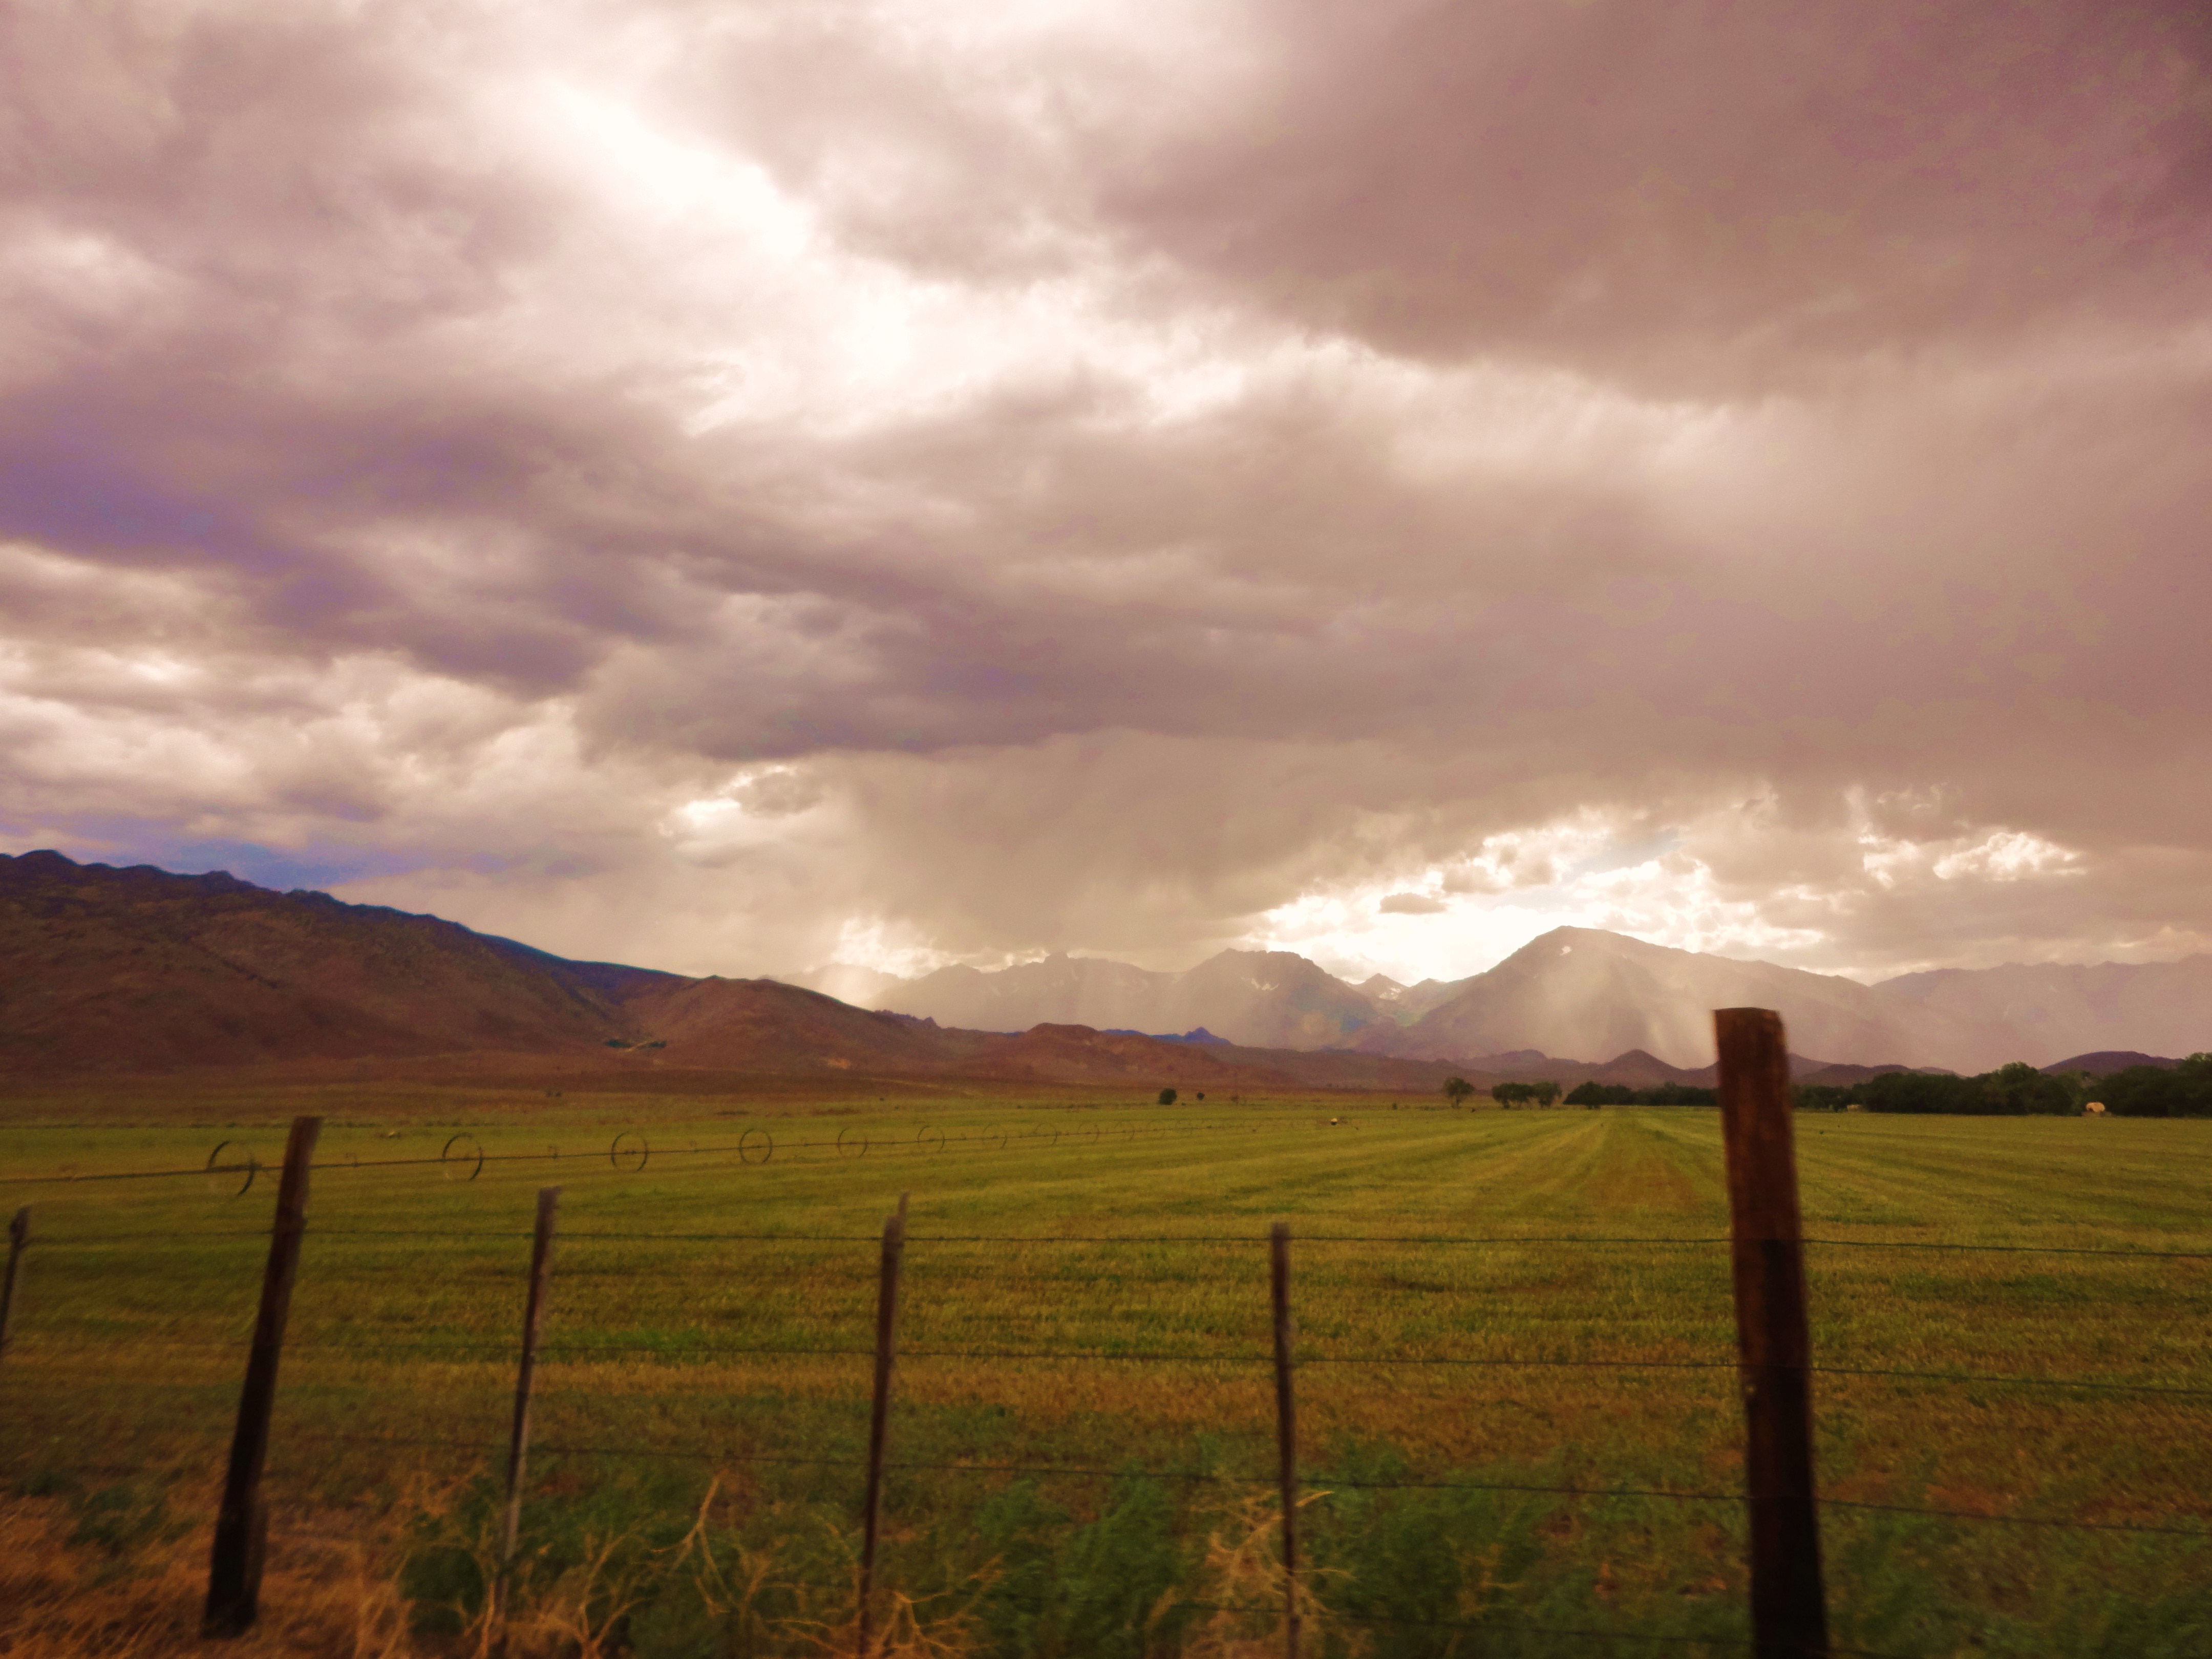 Stormy Owens Valley (2), Cloud, Field, Landscape, Mountain, HQ Photo